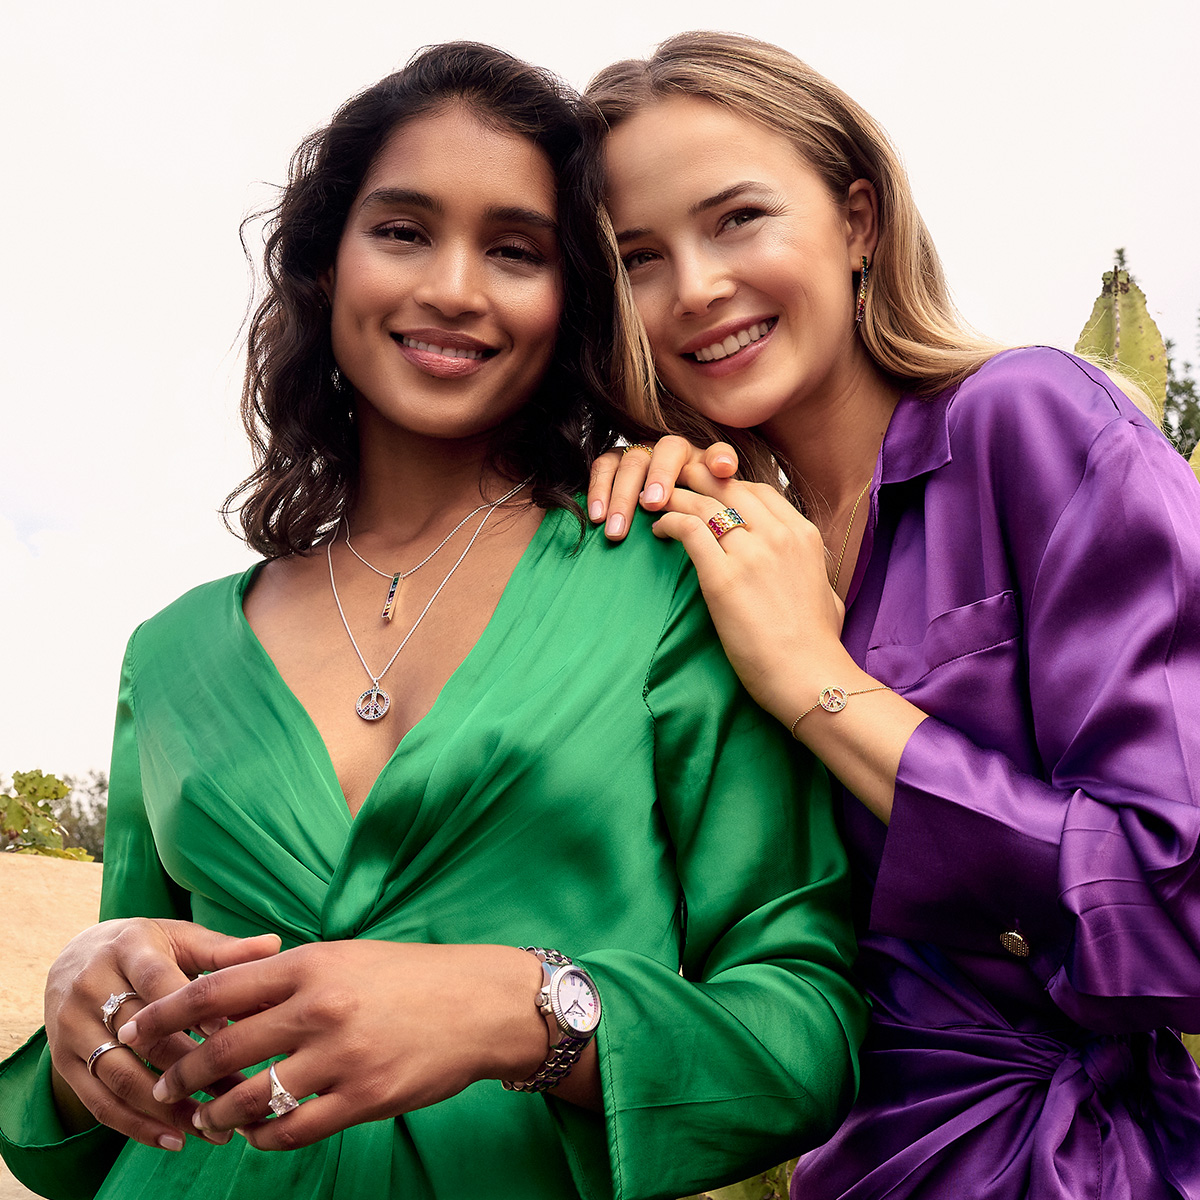 Introducing the new Colours of Peace Collection by THOMAS SABO. In a rainbow of colours, the new collection celebrates diversity and stands for equality and peace 🌈 Discover the new collection here: thomassa.bo/coloursofpeace